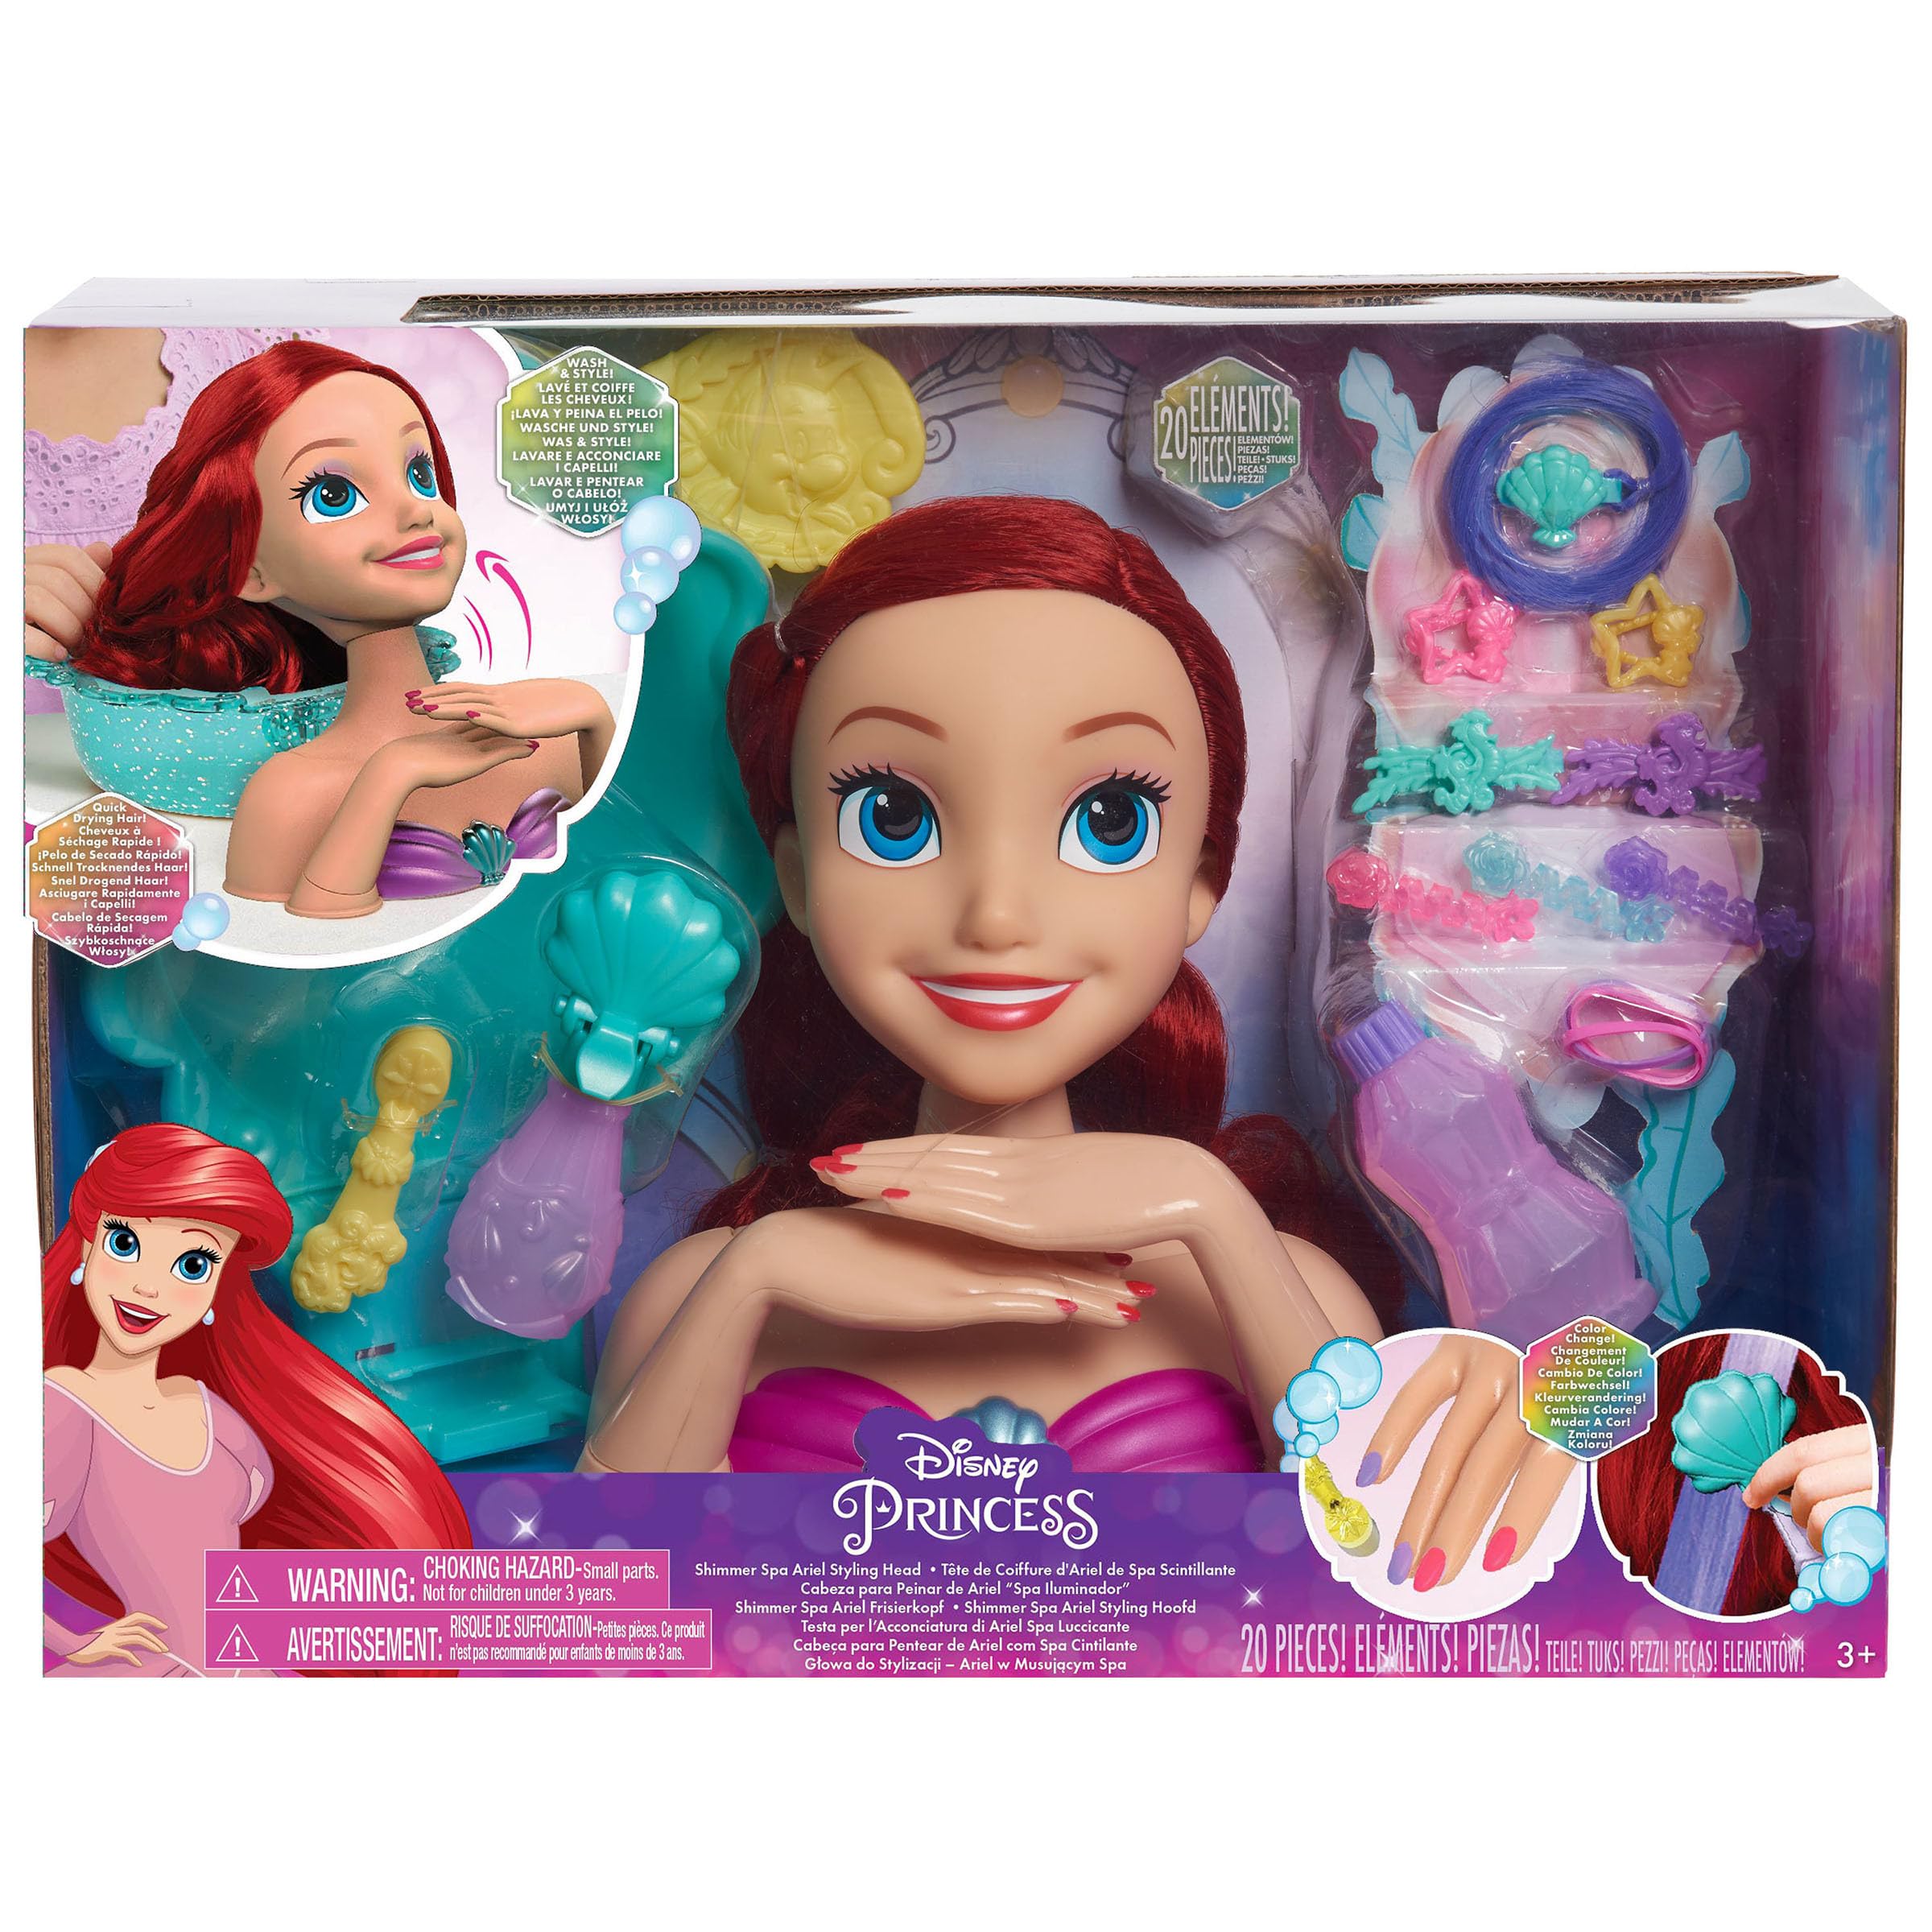 Disney Princess Shimmer Spa Ariel 8-inch Styling Head, 20-Pieces, Red Hair, Pretend Play, Officially Licensed Kids Toys for Ages 3 Up by Just Play